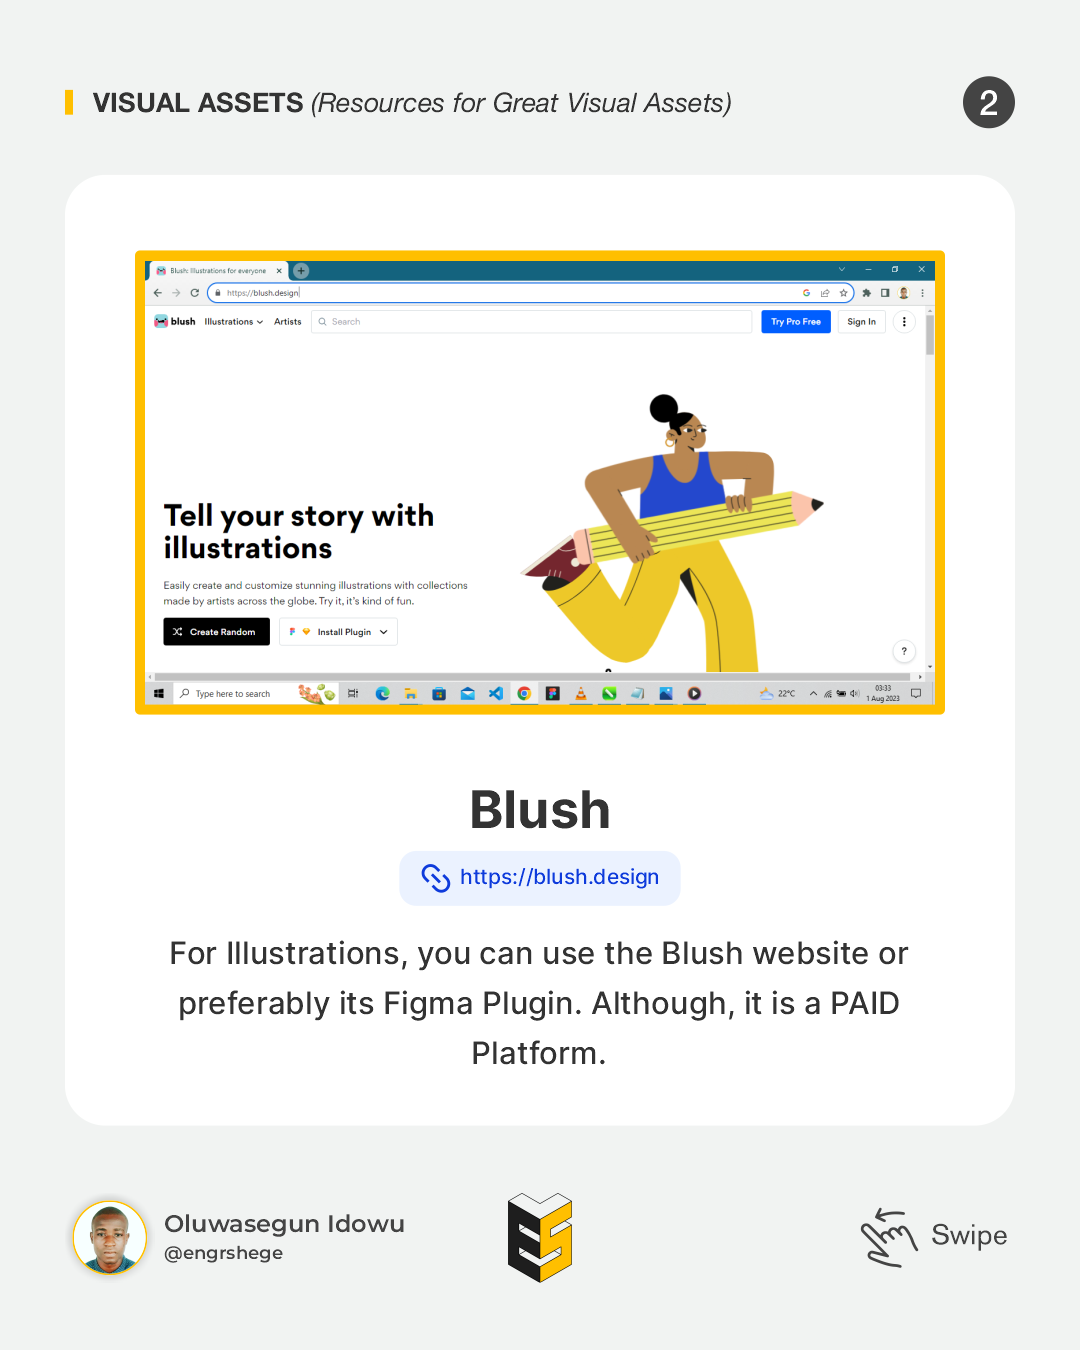 Resources for Illustrations: Blush